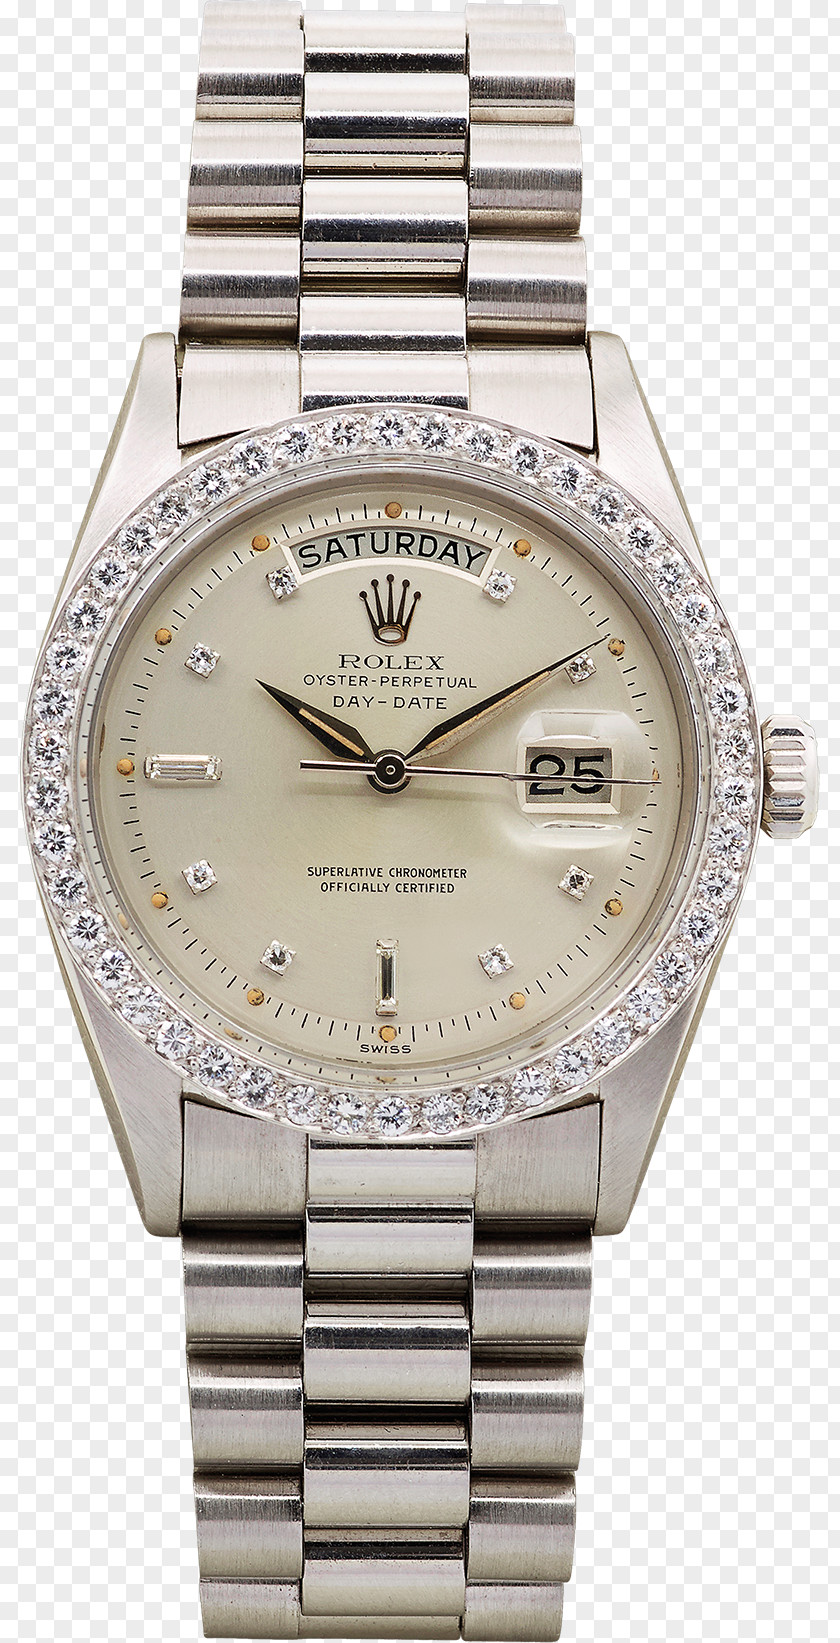 Rolex Datejust GMT Master II Watch Day-Date PNG